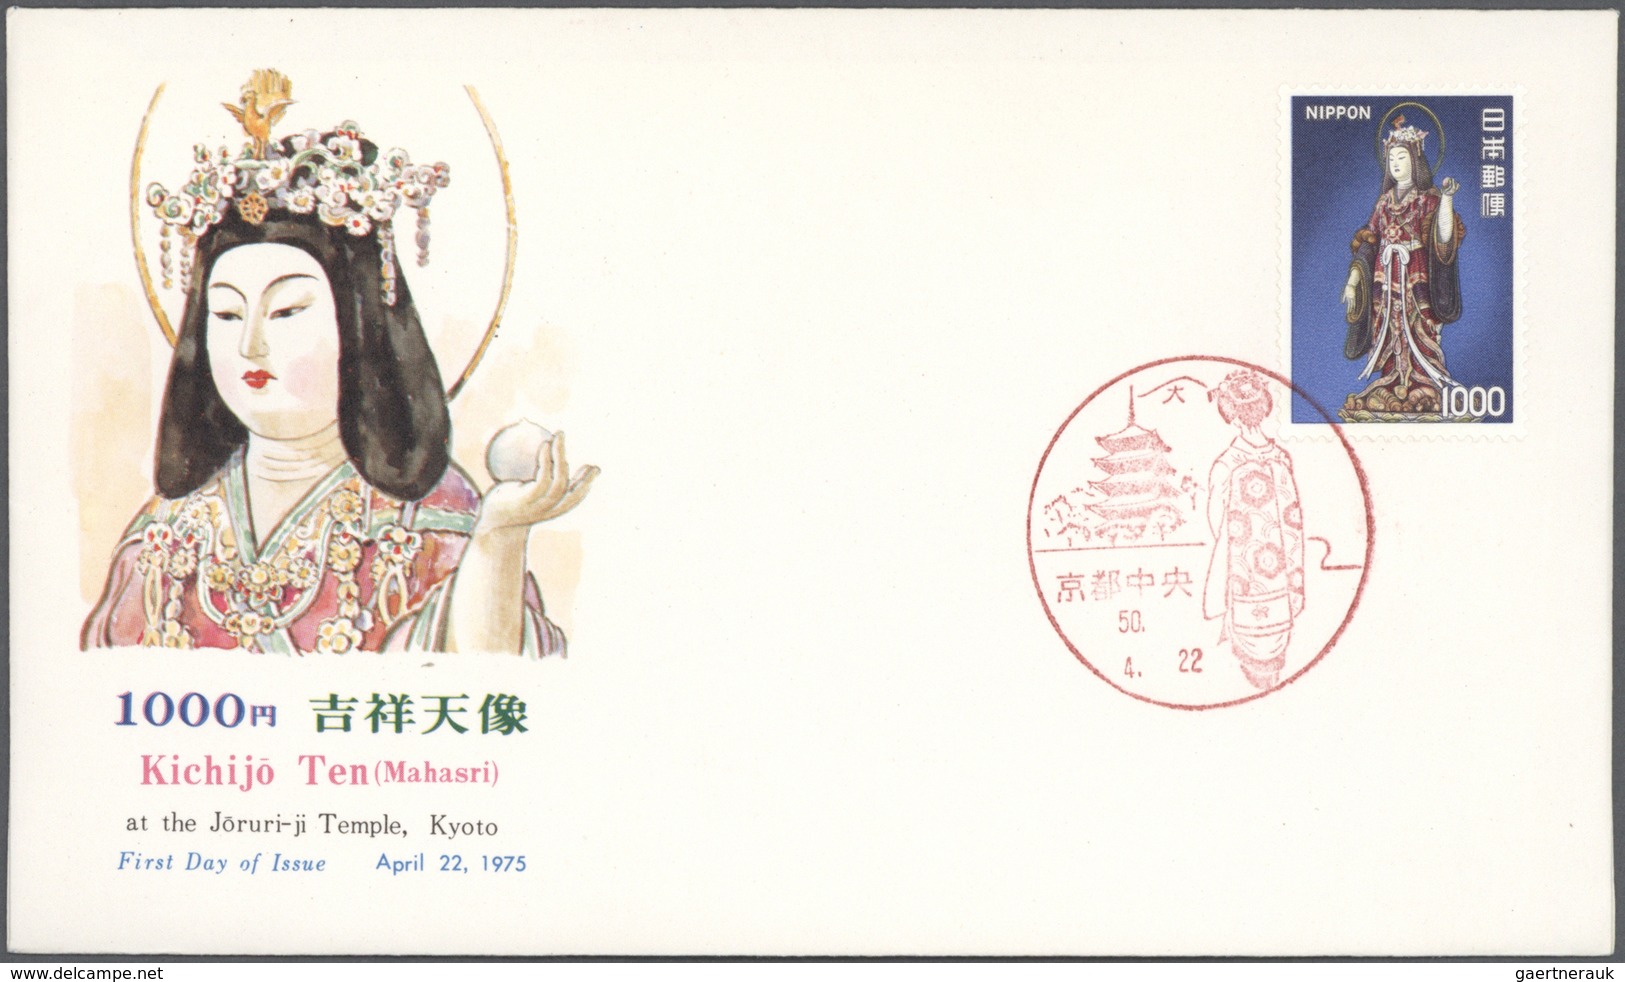 Japan: 1949/2004 (ca.) inc. some pre-WWII, 1000s of FDC in large- (22) or small cover books (16), ma